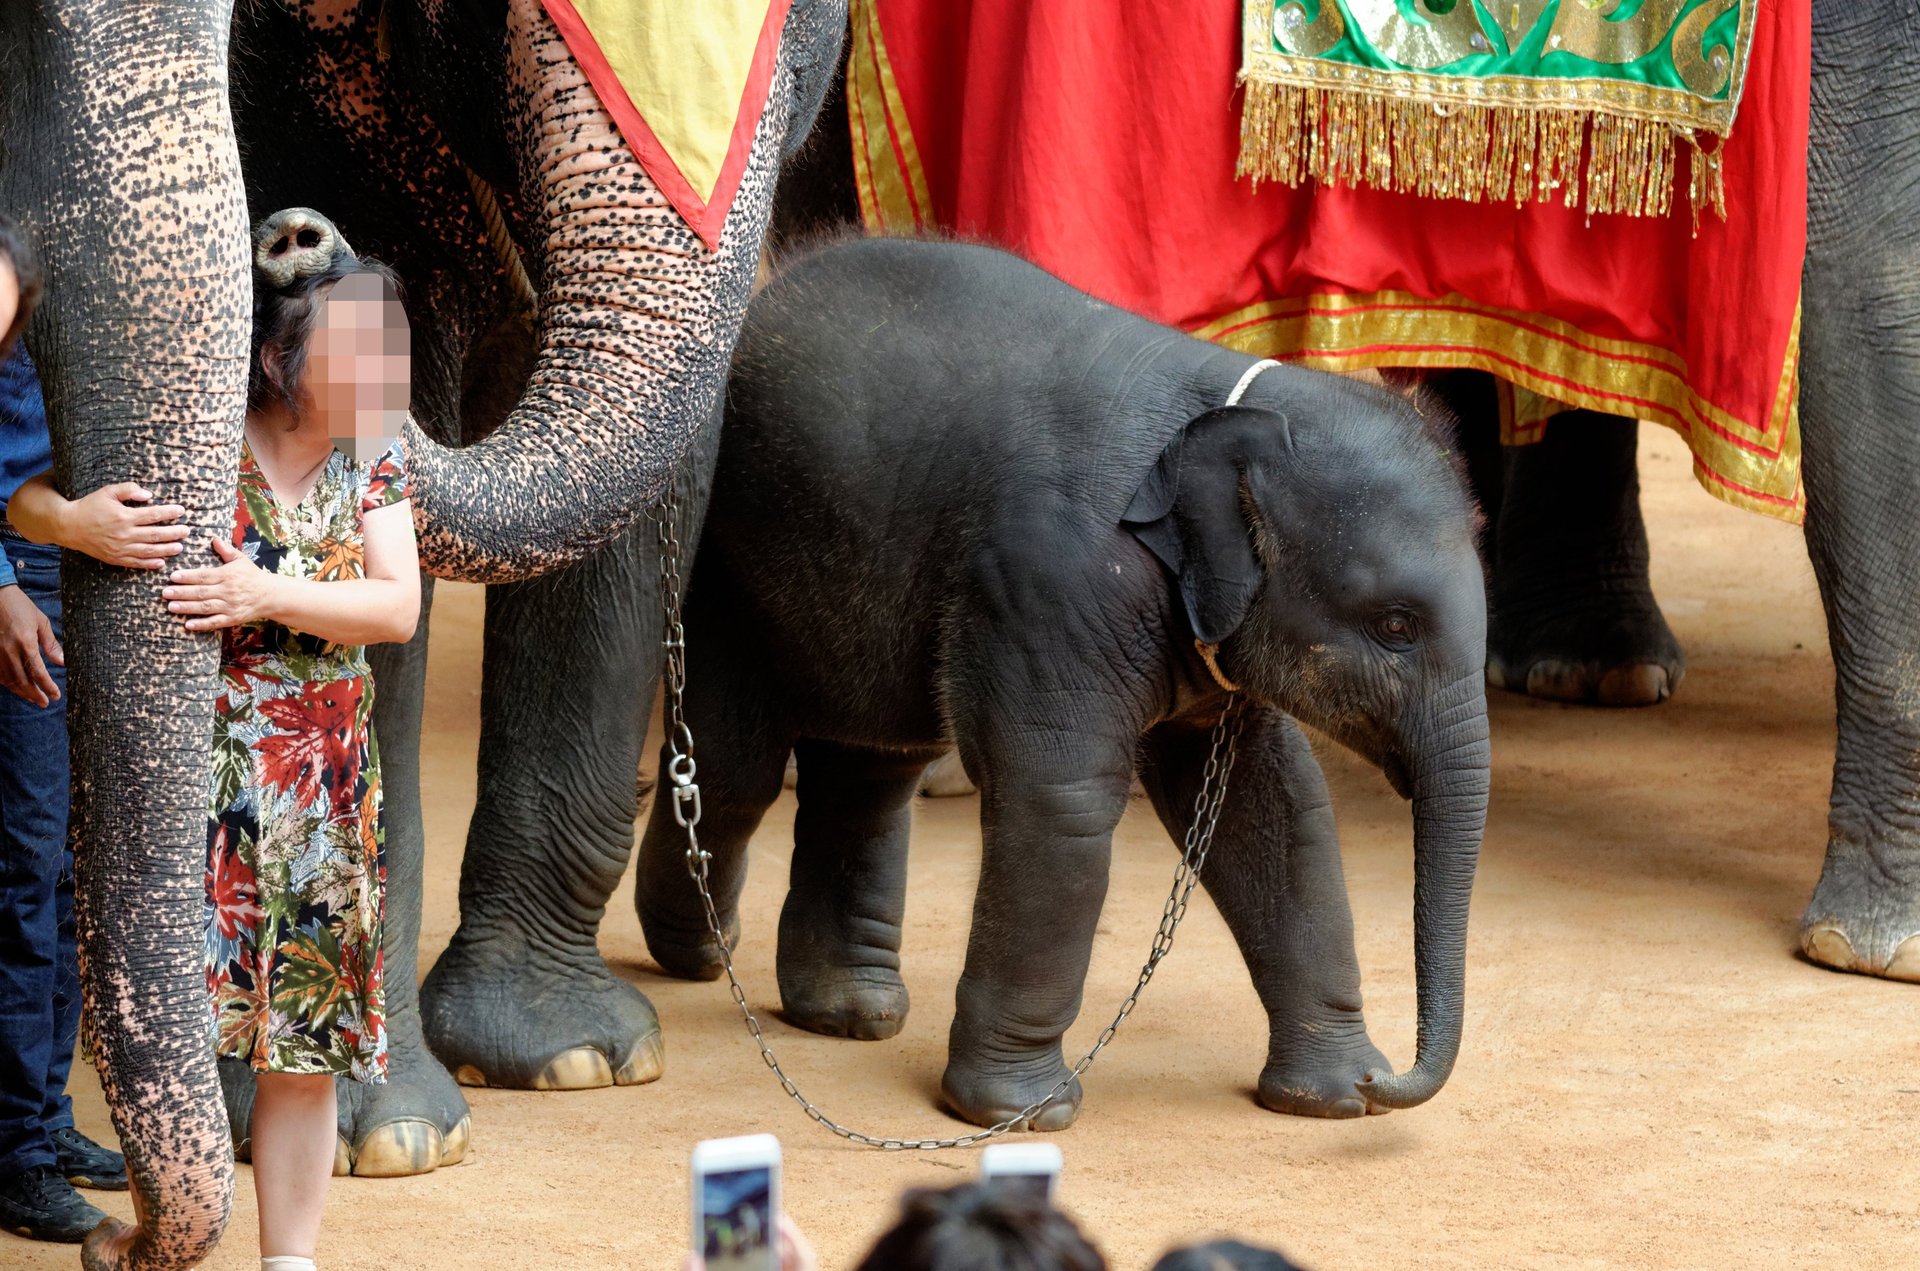 A baby elephant is chained up in Nong Nooch Garden in Thailand.